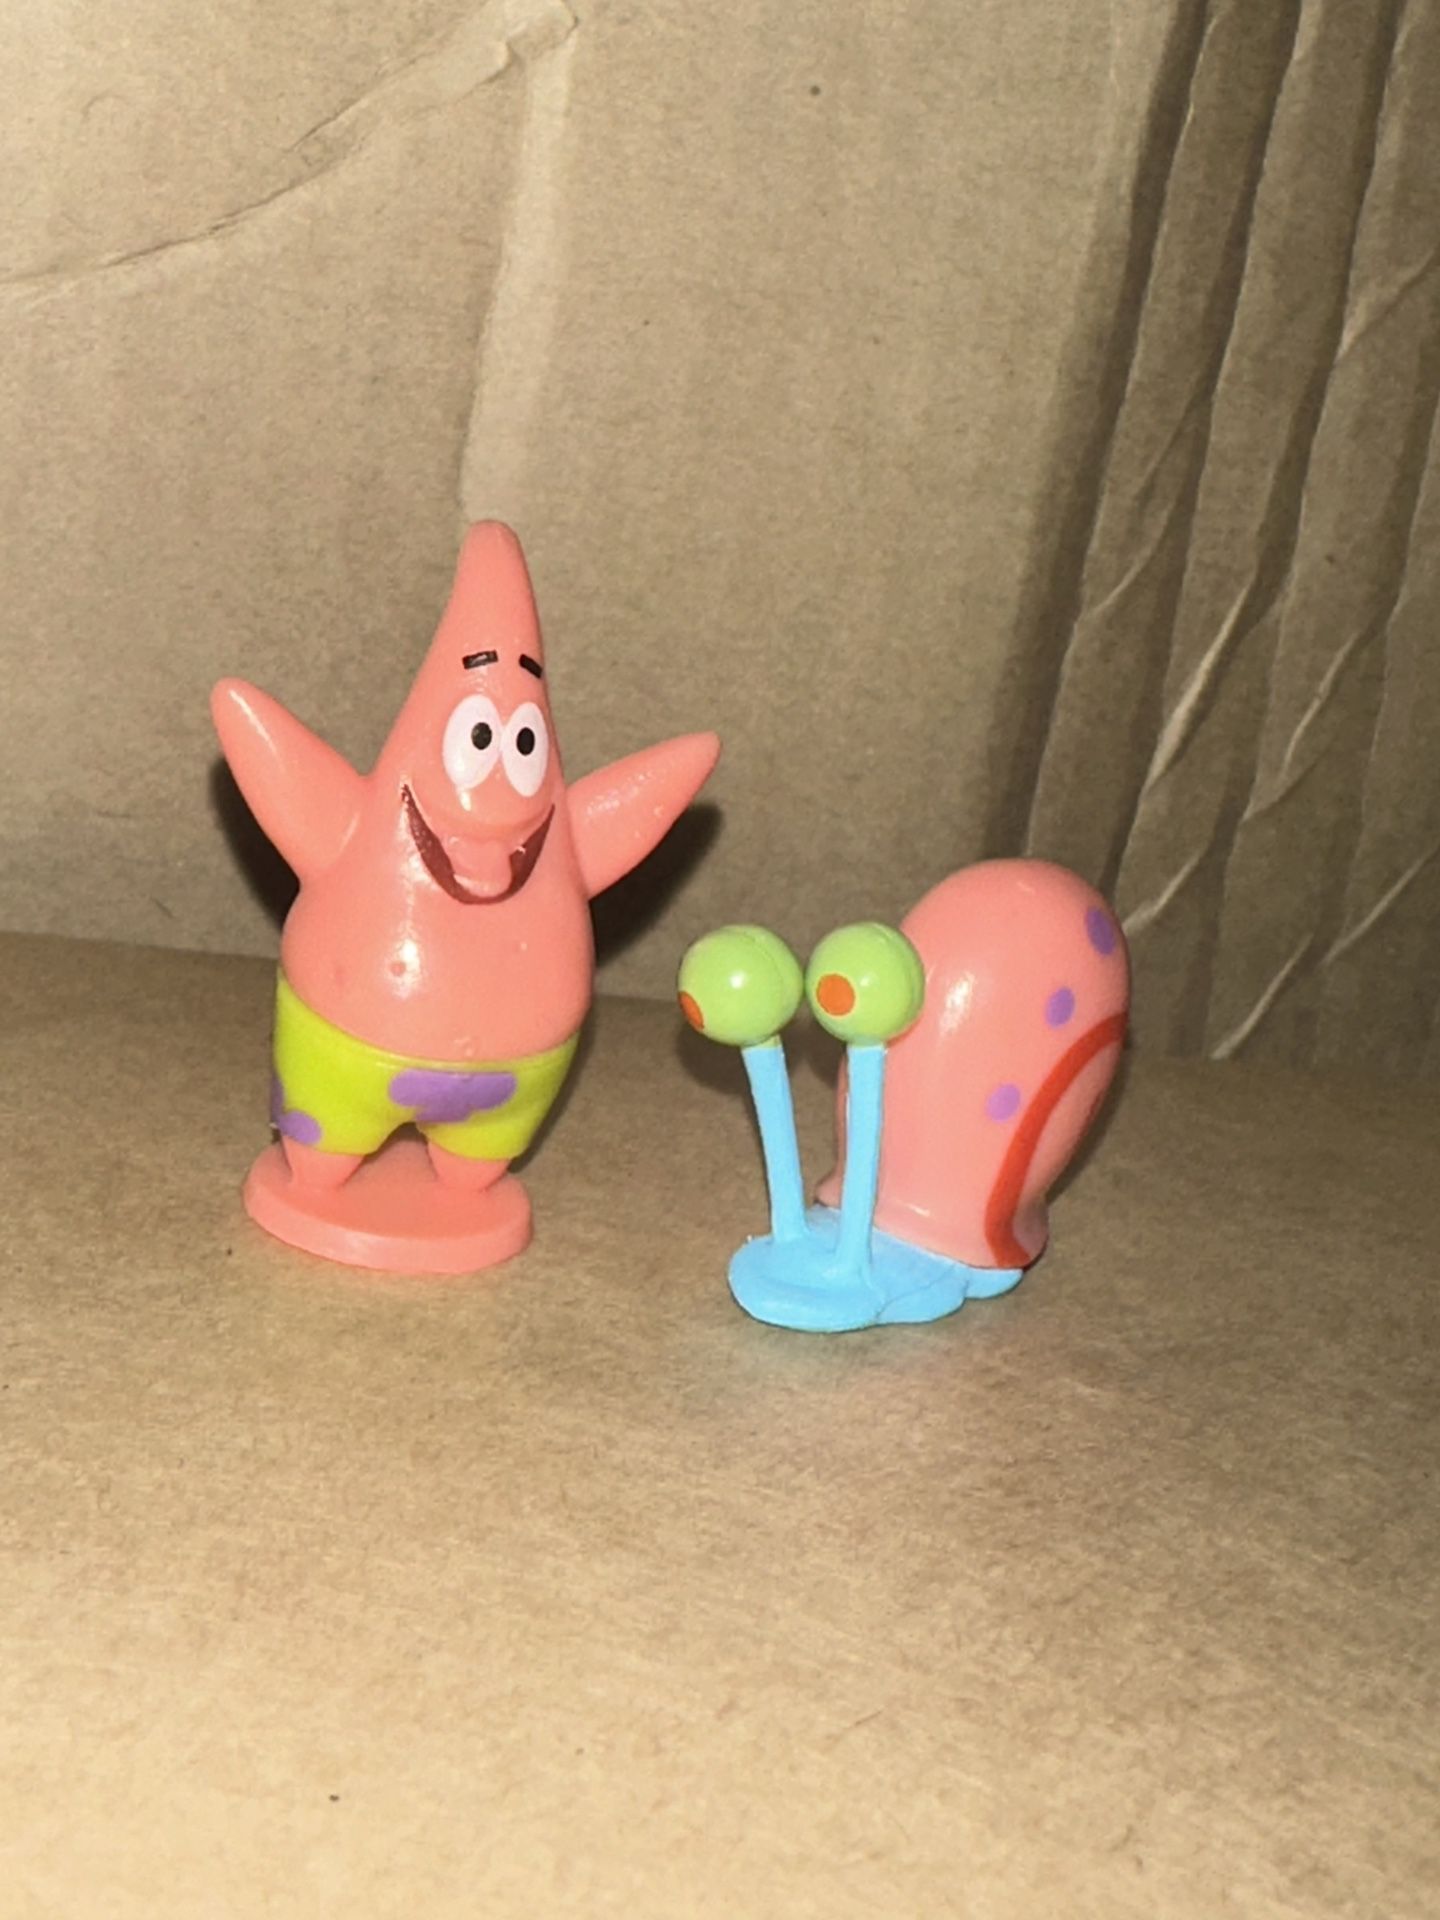 SpongeBob Squarepants PATRICK Star (arms up)  And Gary - Finders Keepers Action Figure 1”